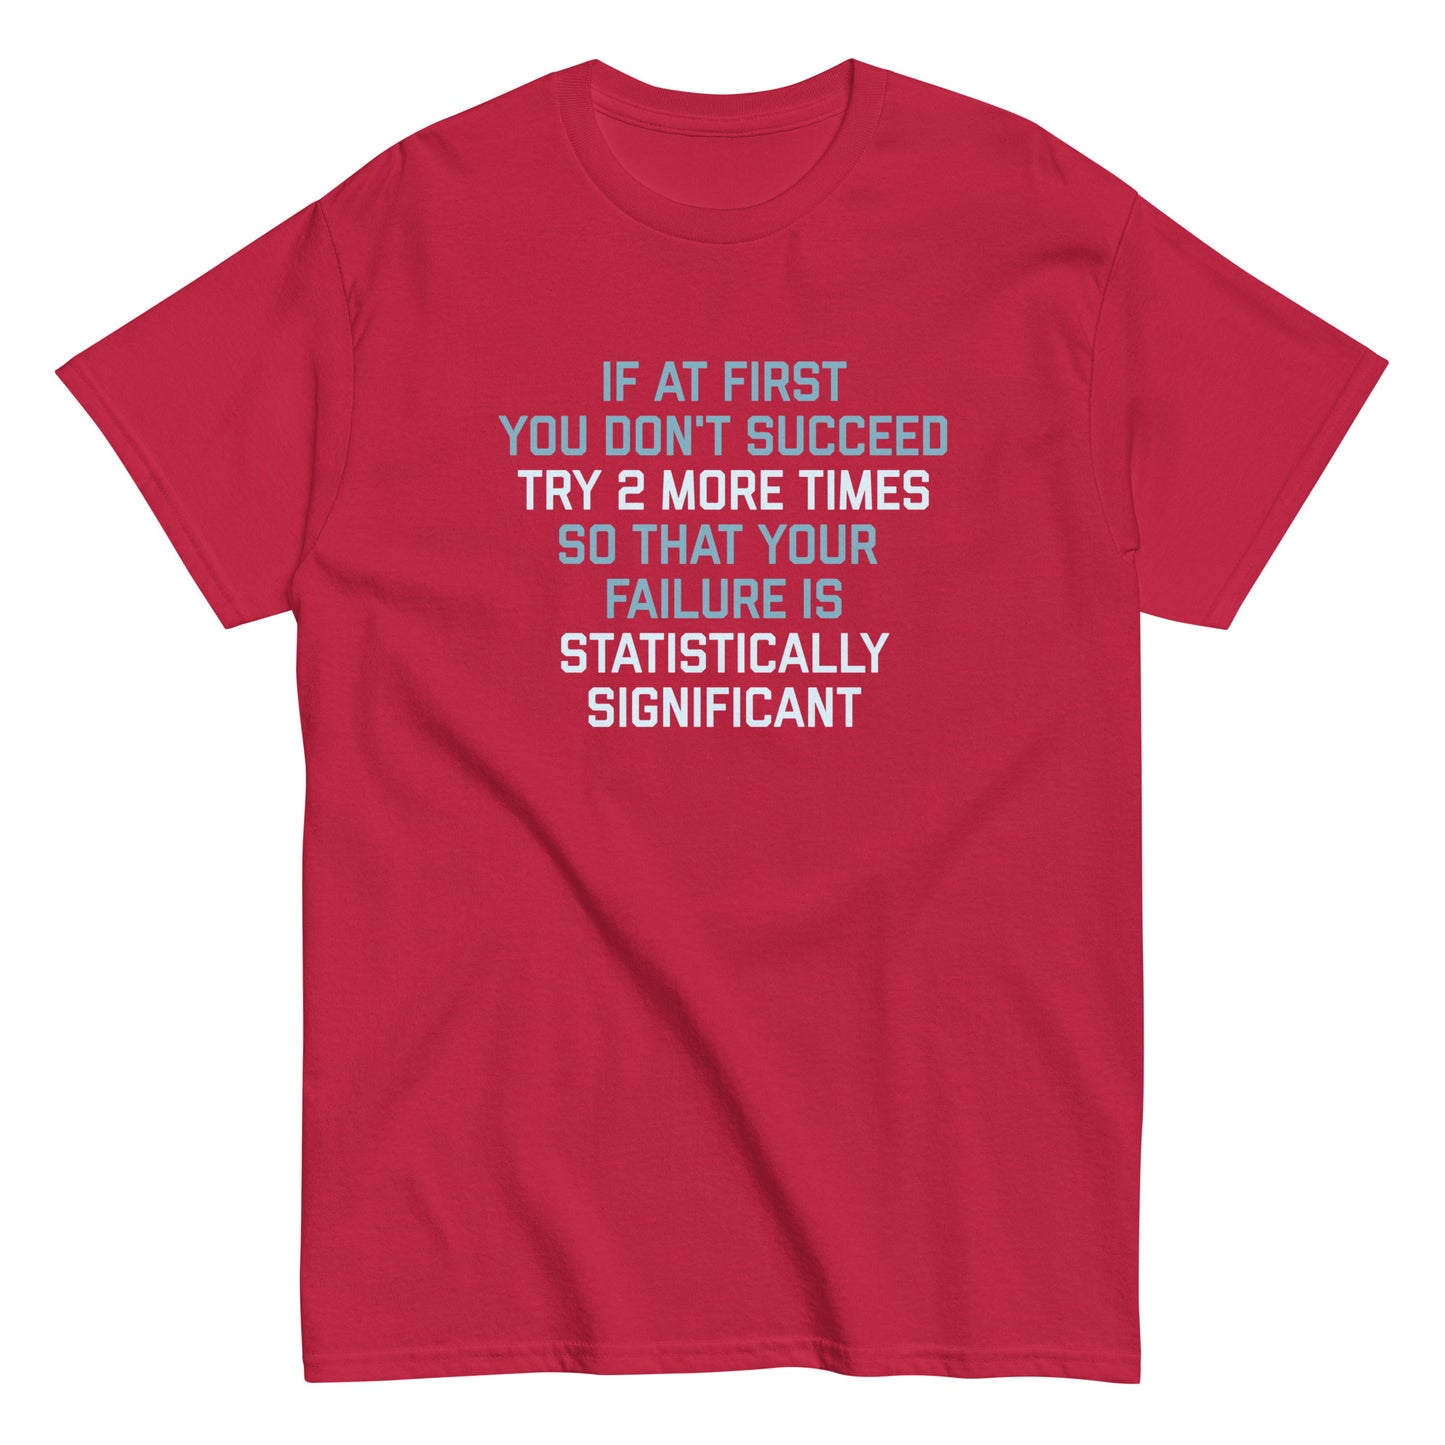 Try 2 More Times So That Your Failure Is Statistically Significant Men's Classic Tee